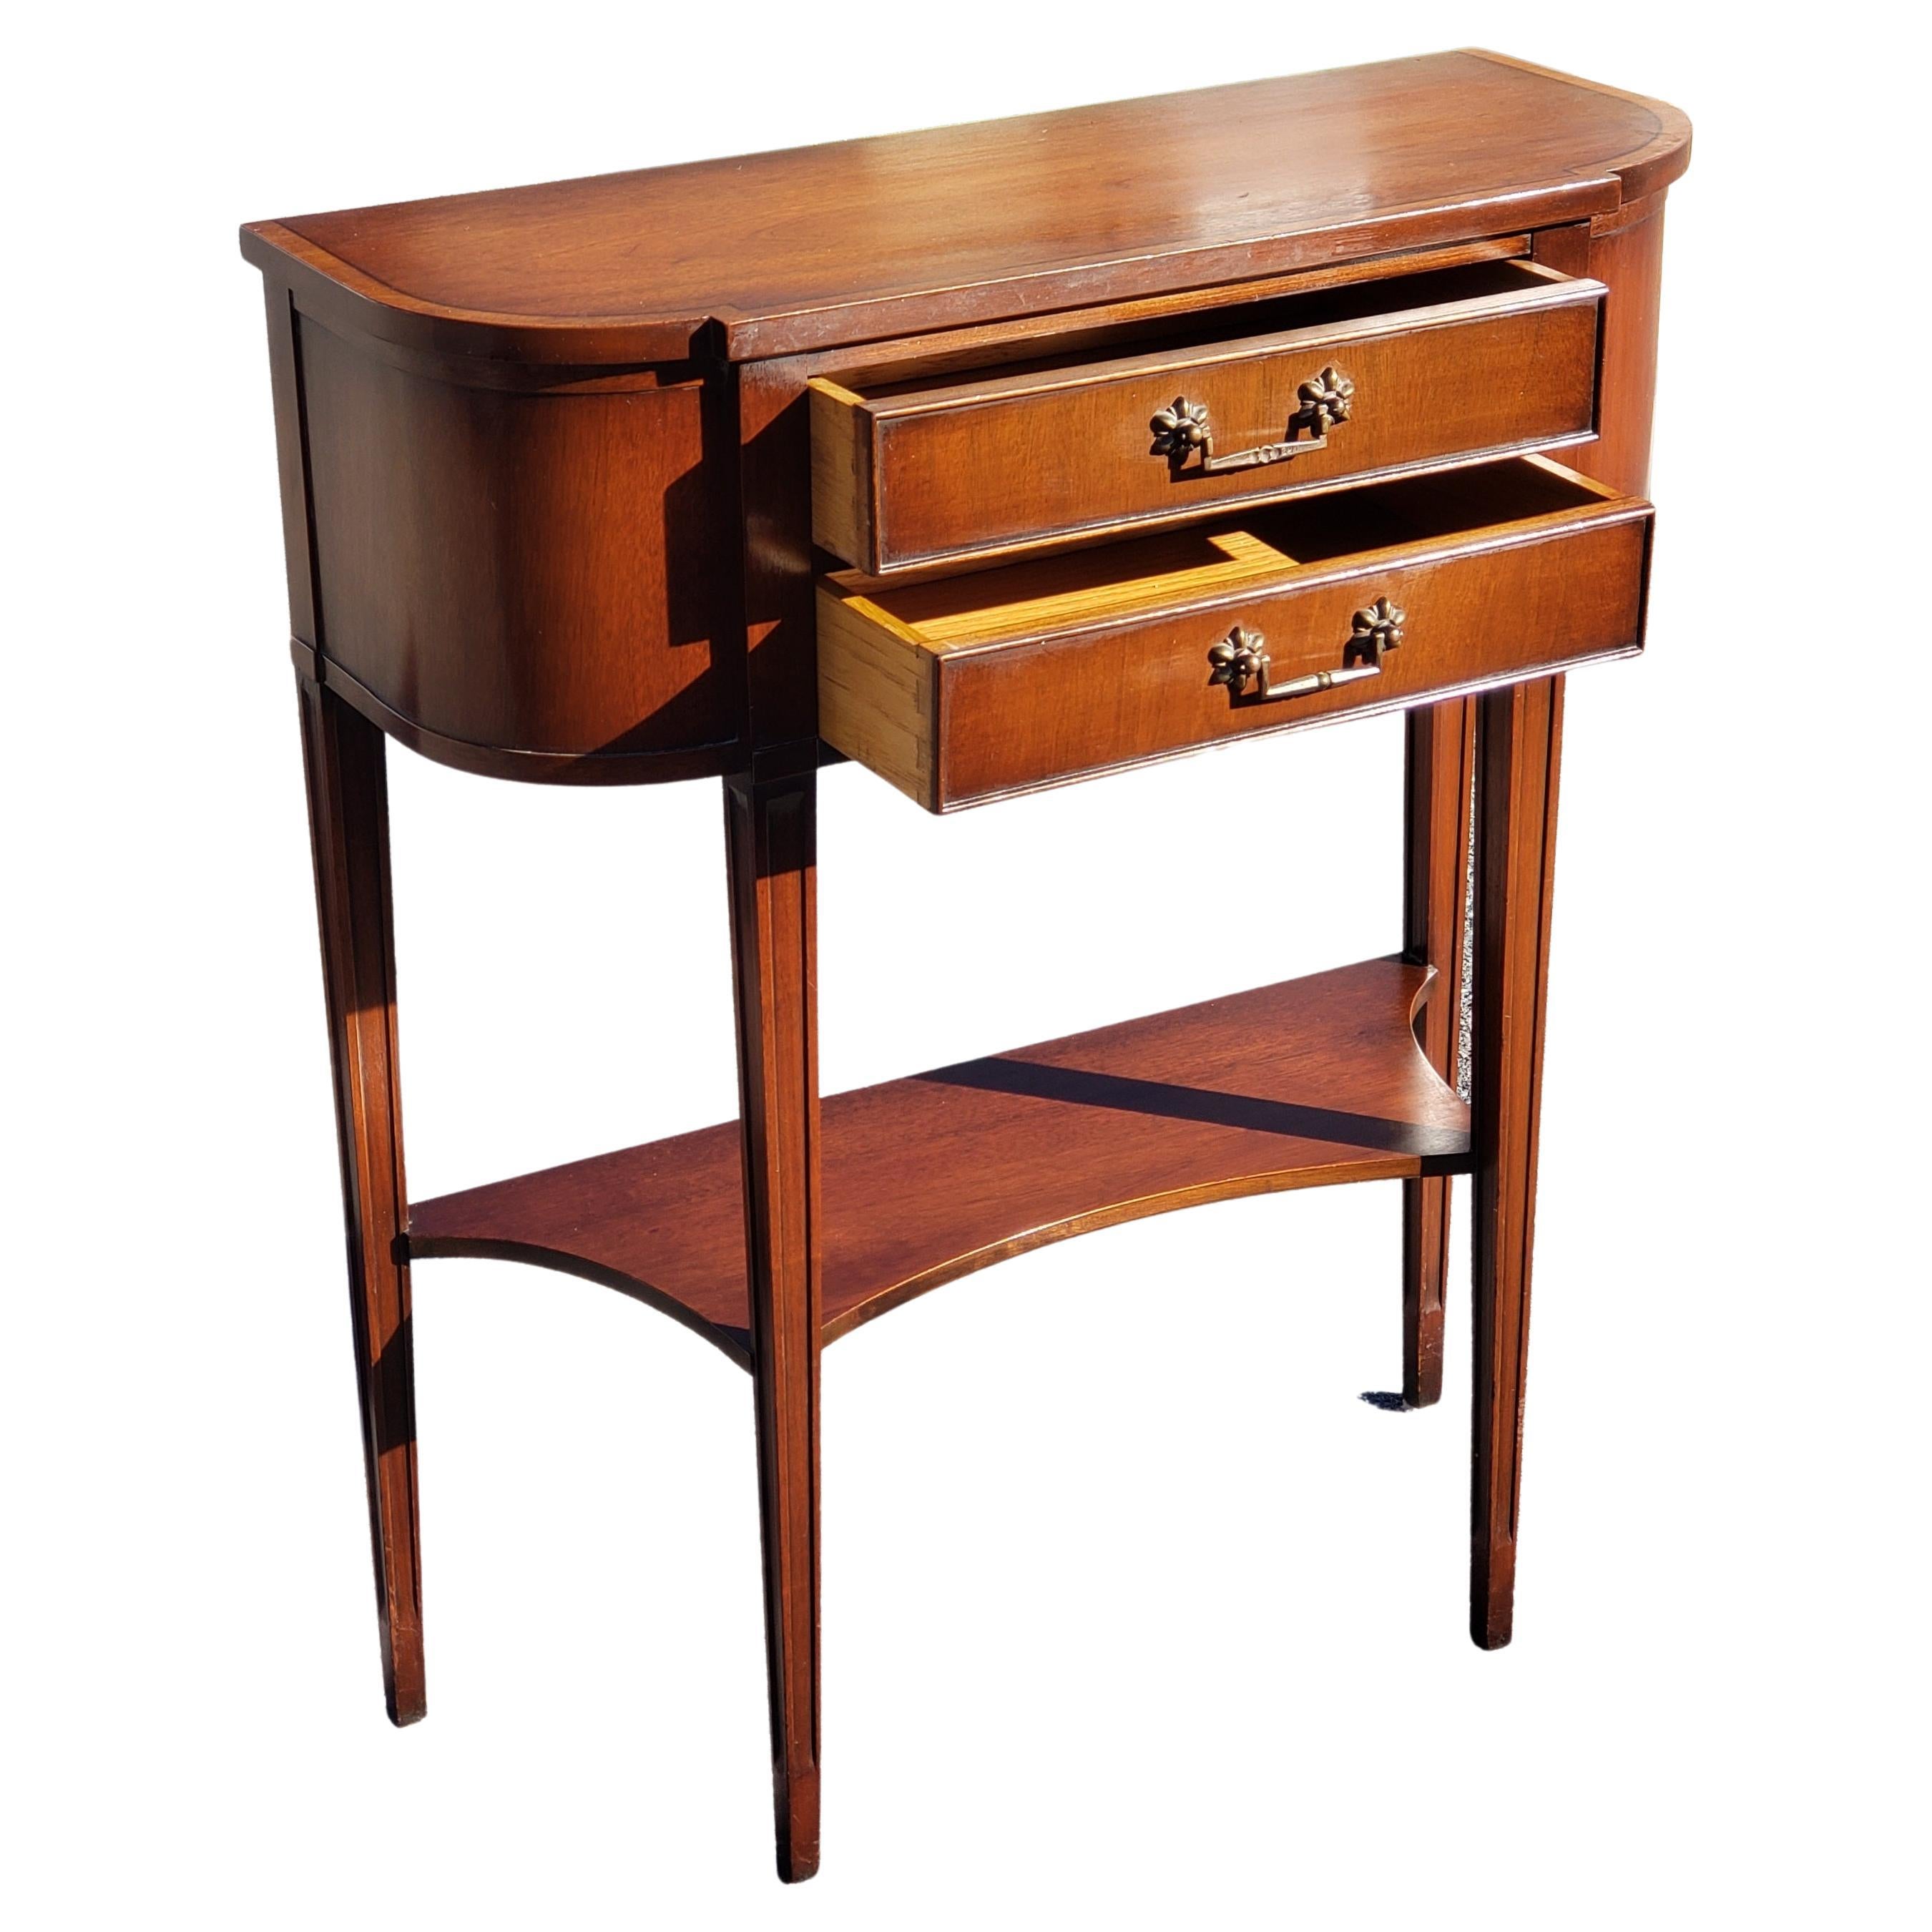 Hand-Crafted Pair of Tier 2-Drawer Banded Mahogany Regency Console Tables, Circa 1940s